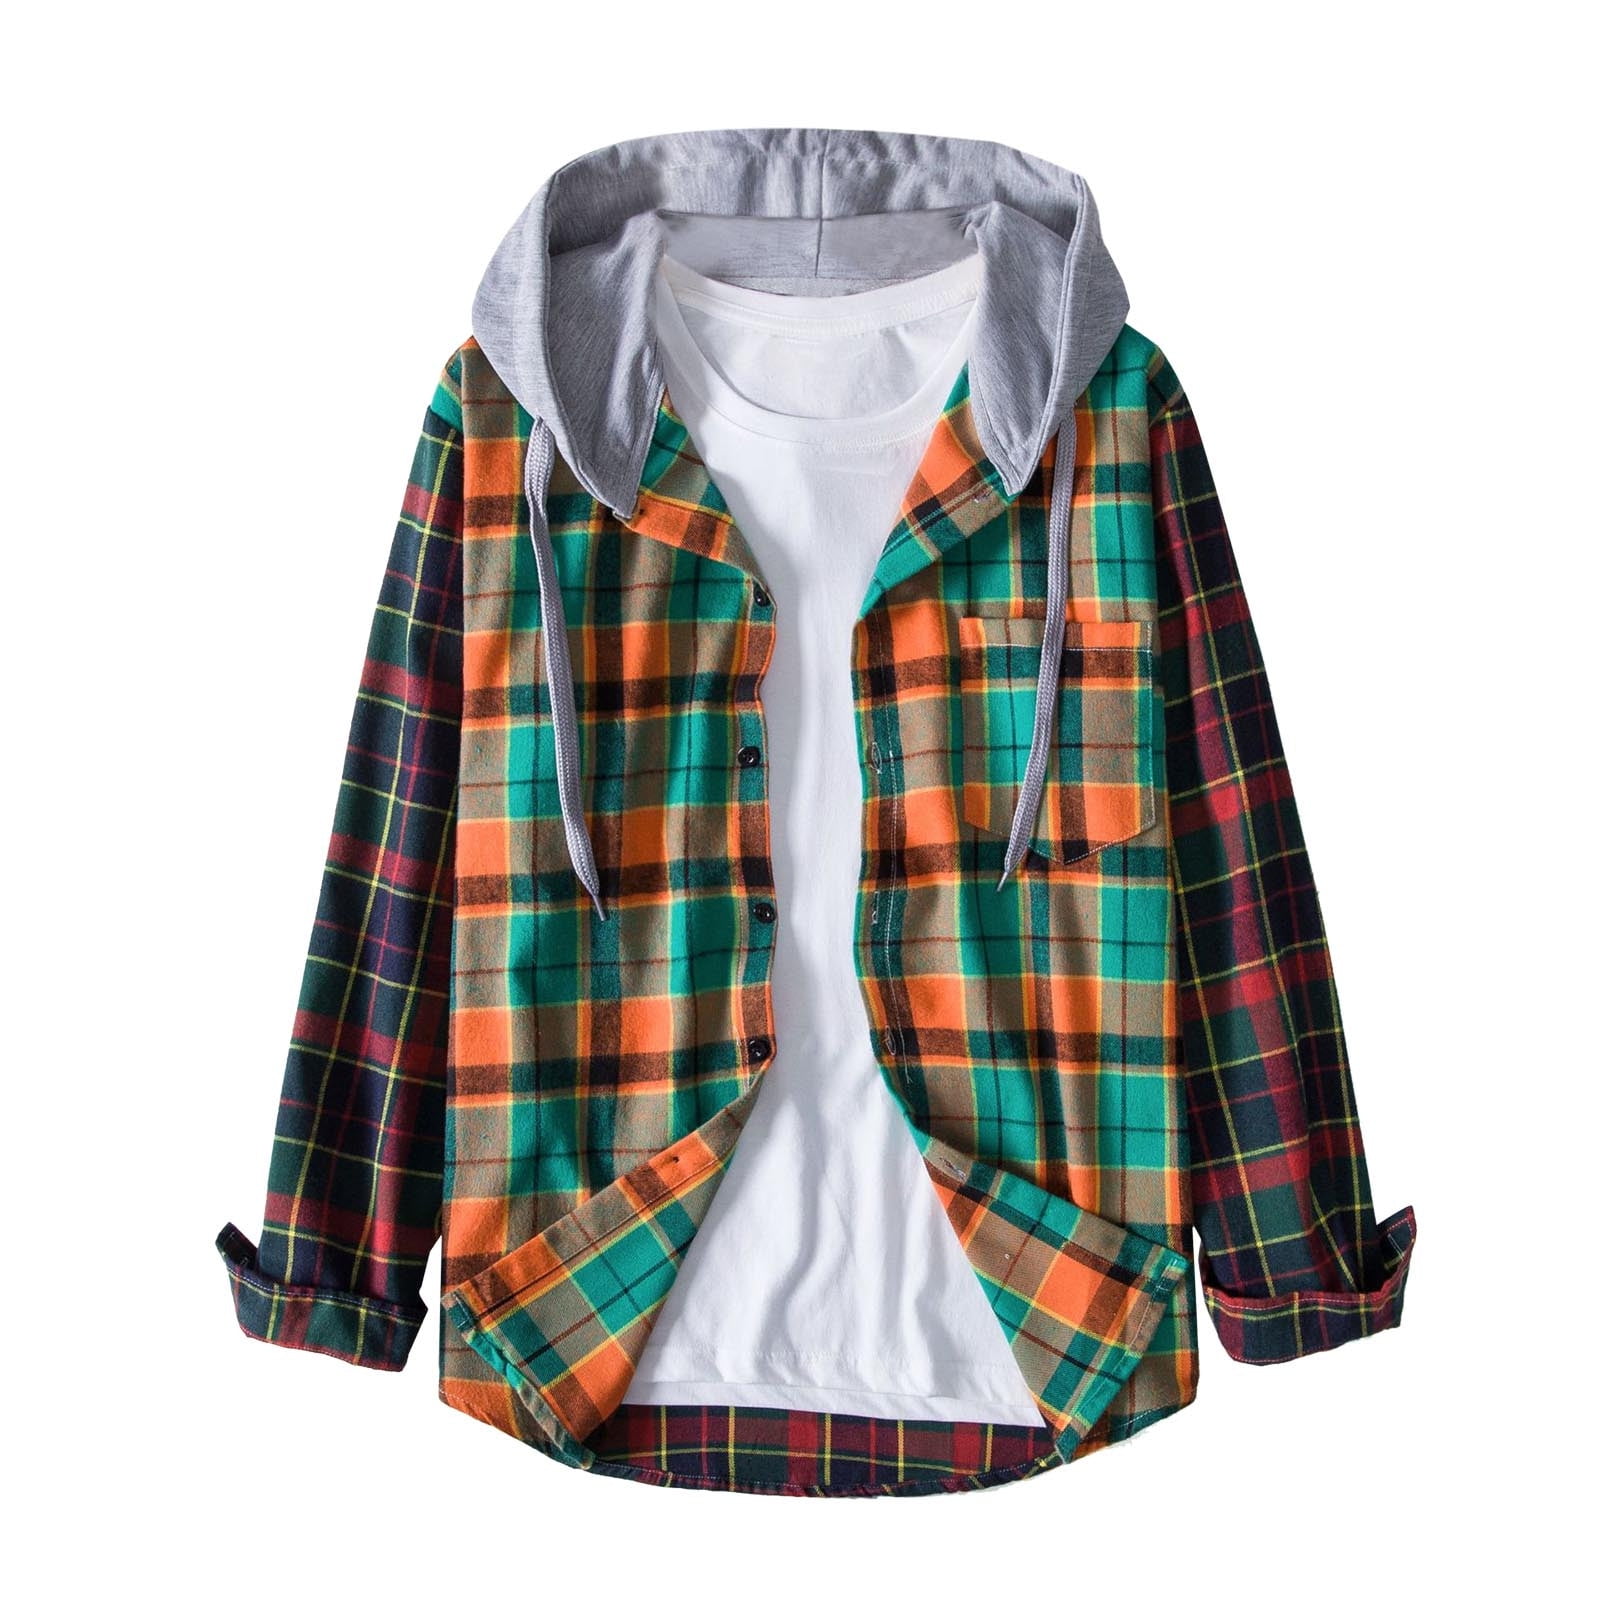 Men's Long Sleeve Hoodie Jacket Plaid Button Down Flannel Shirts, Mens  Hooded Shirts Casual Lightweight Shirt Jackets